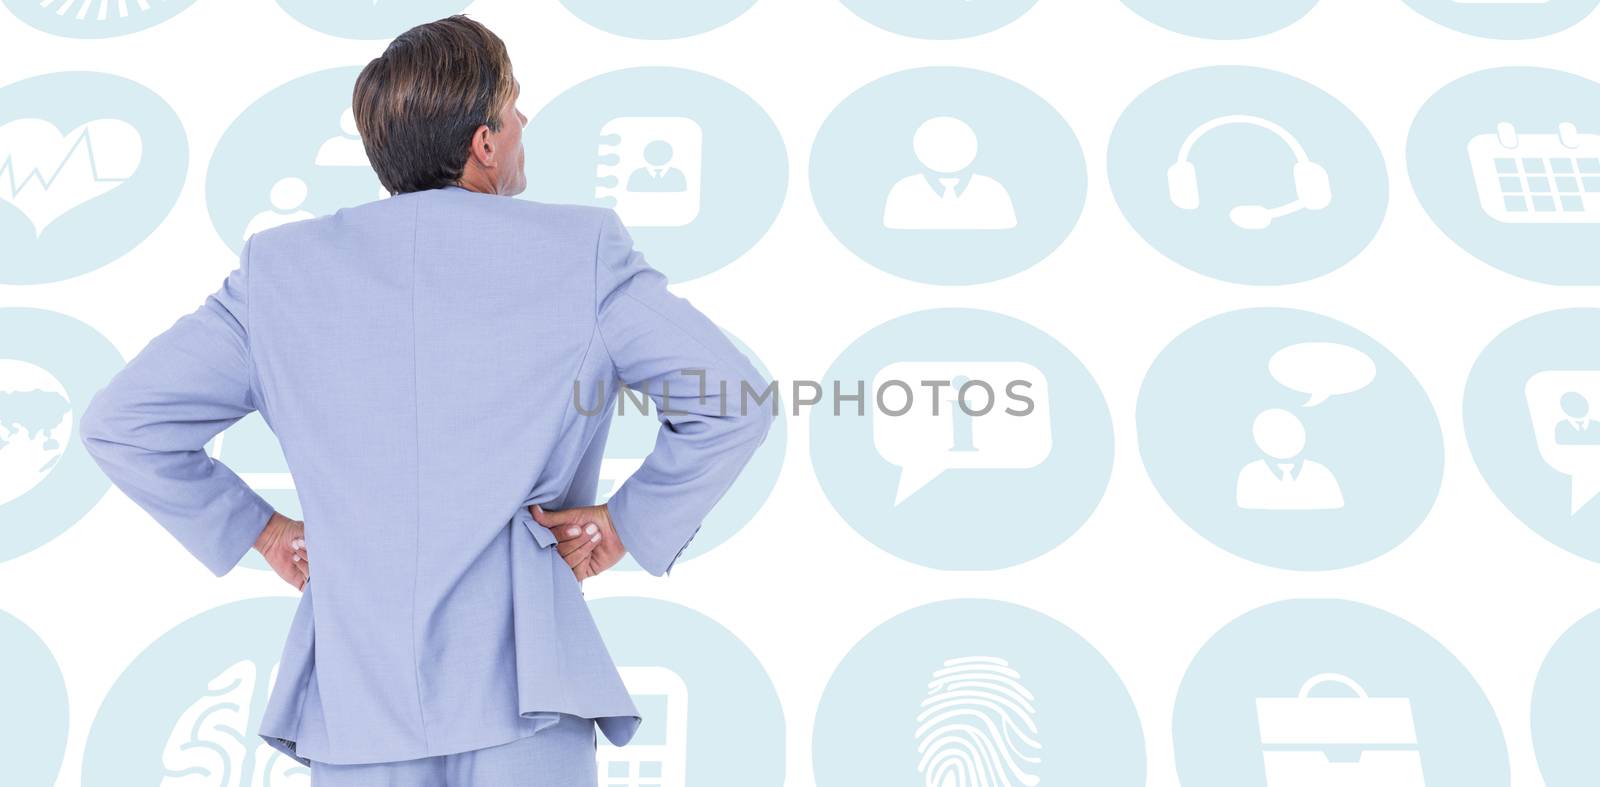  Serious businessman with hands on hips against multiple blue icons 